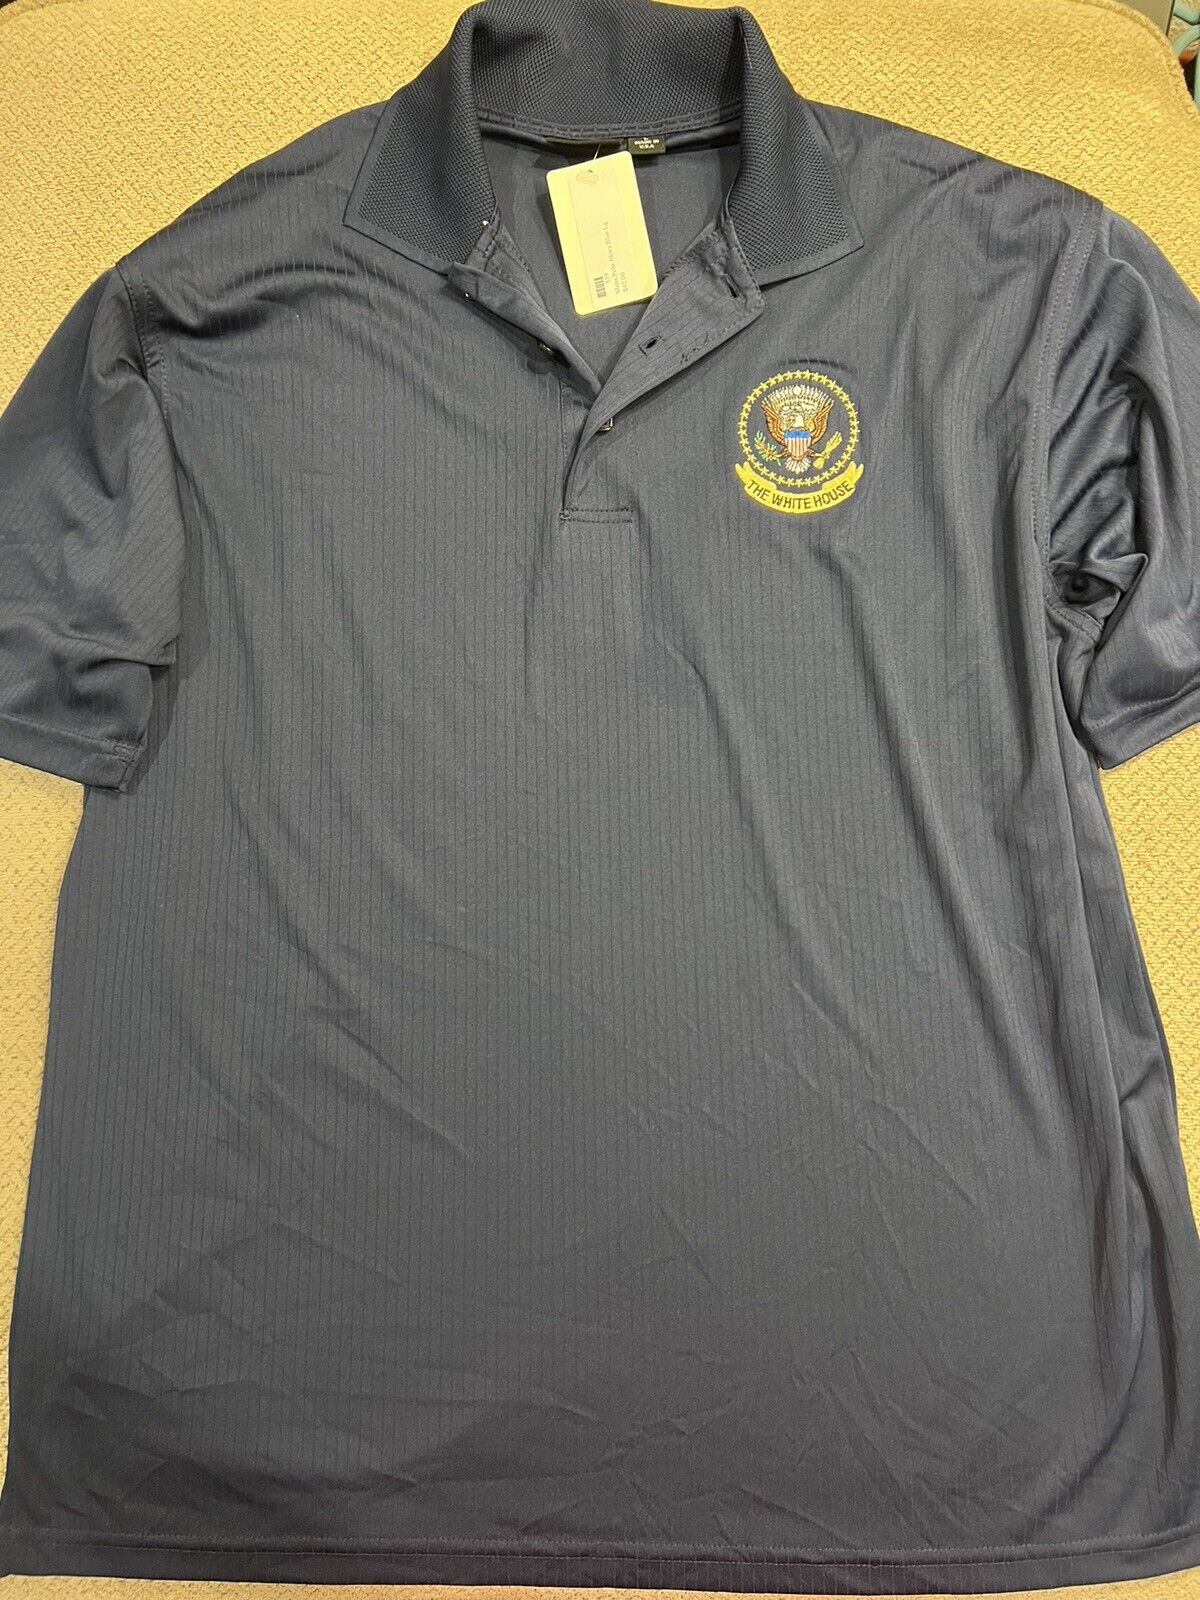 Mens The White House President POTUS Embroidered Polo Golf Shirt Large New $42